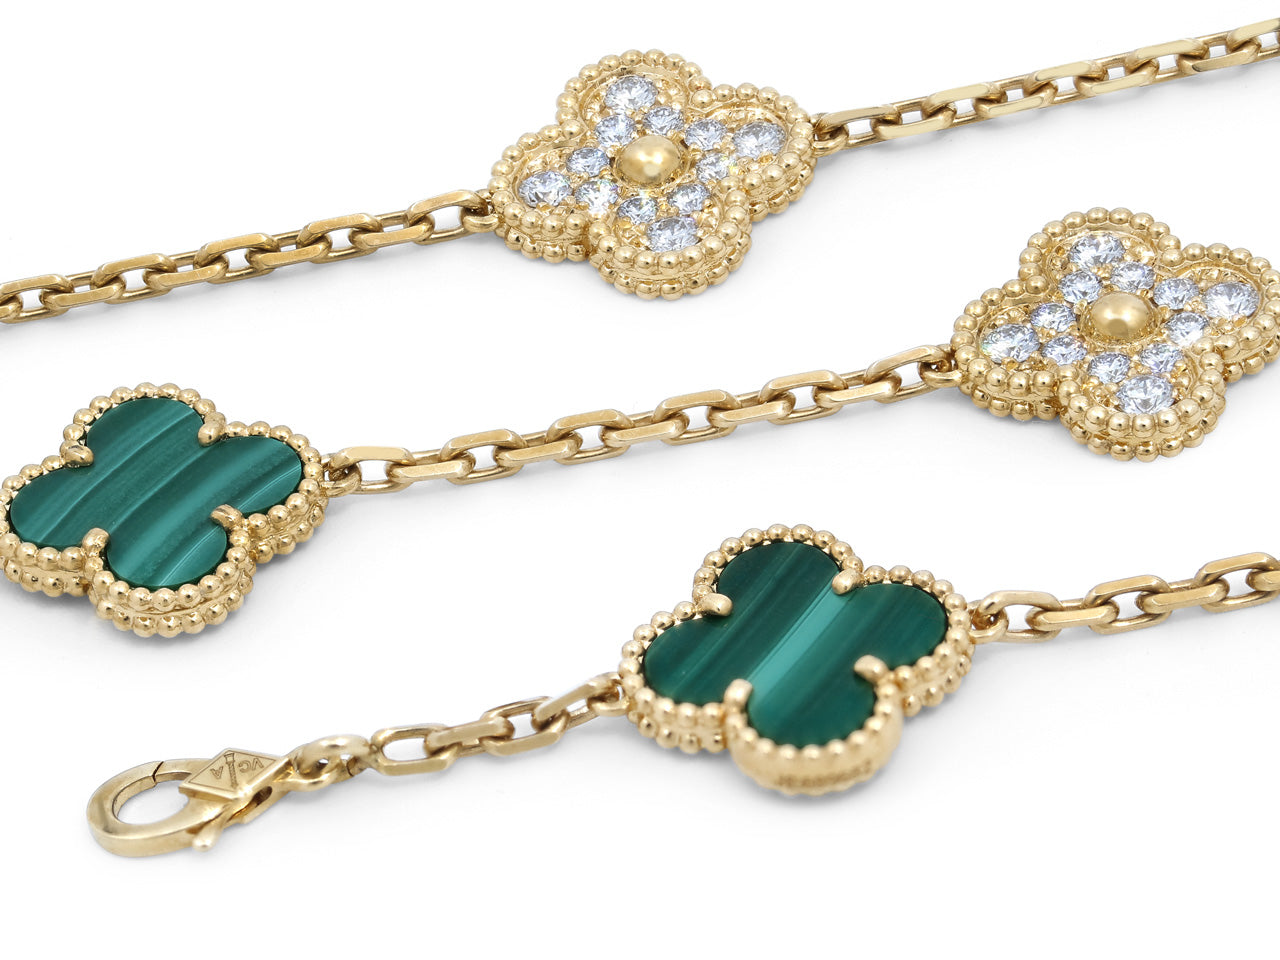 Estate Jewelry Van Cleef & Arpels Alhambra Yellow Gold Necklace - Estate  Jewelry